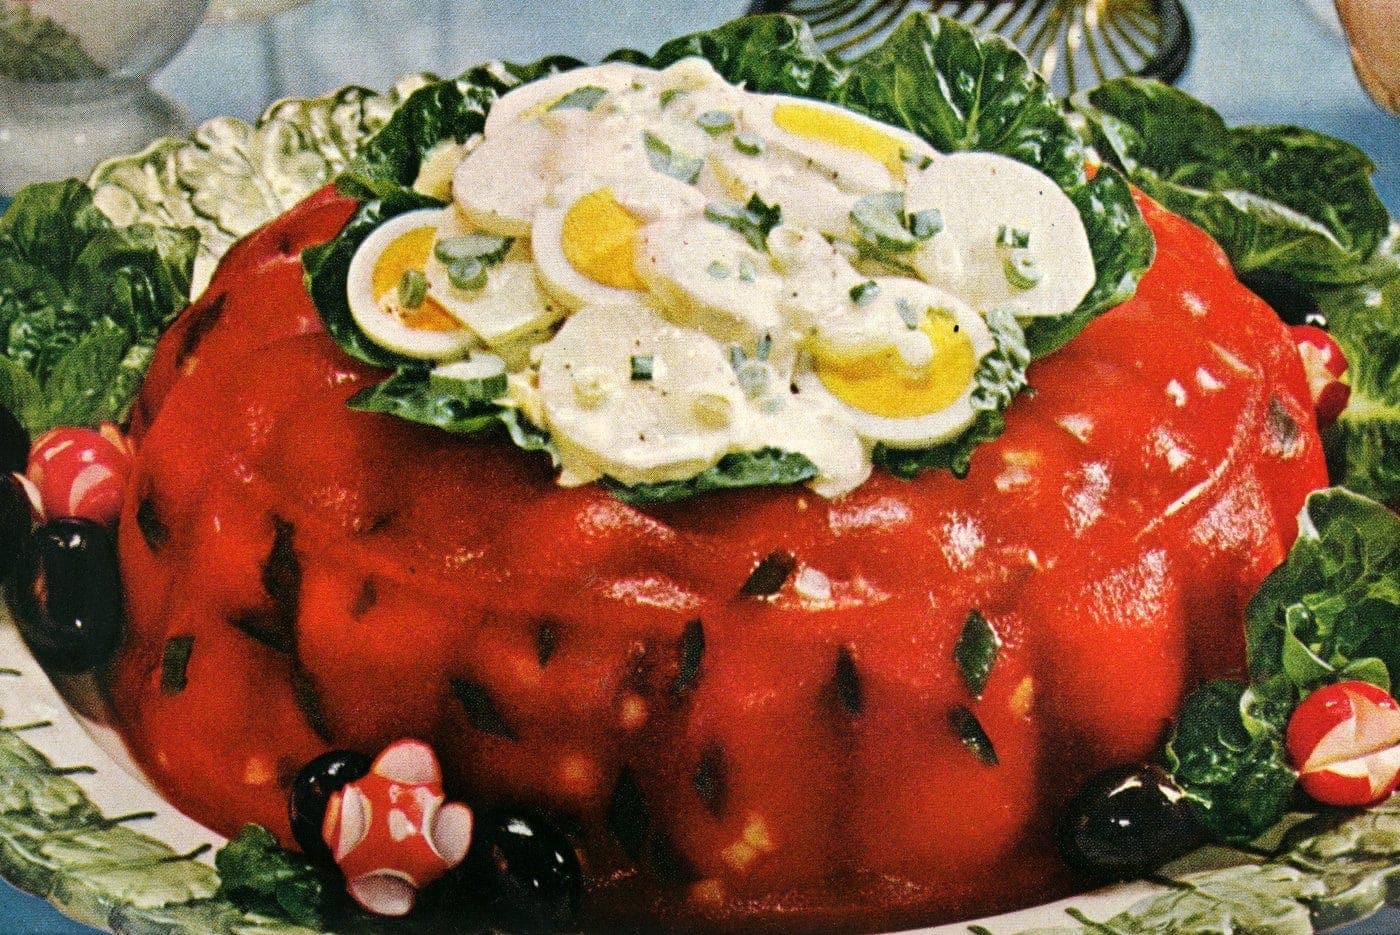 Trust Me, I Can Tell Which Generation You’re from Based on the Retro Food You Like tomato aspic with potato salad